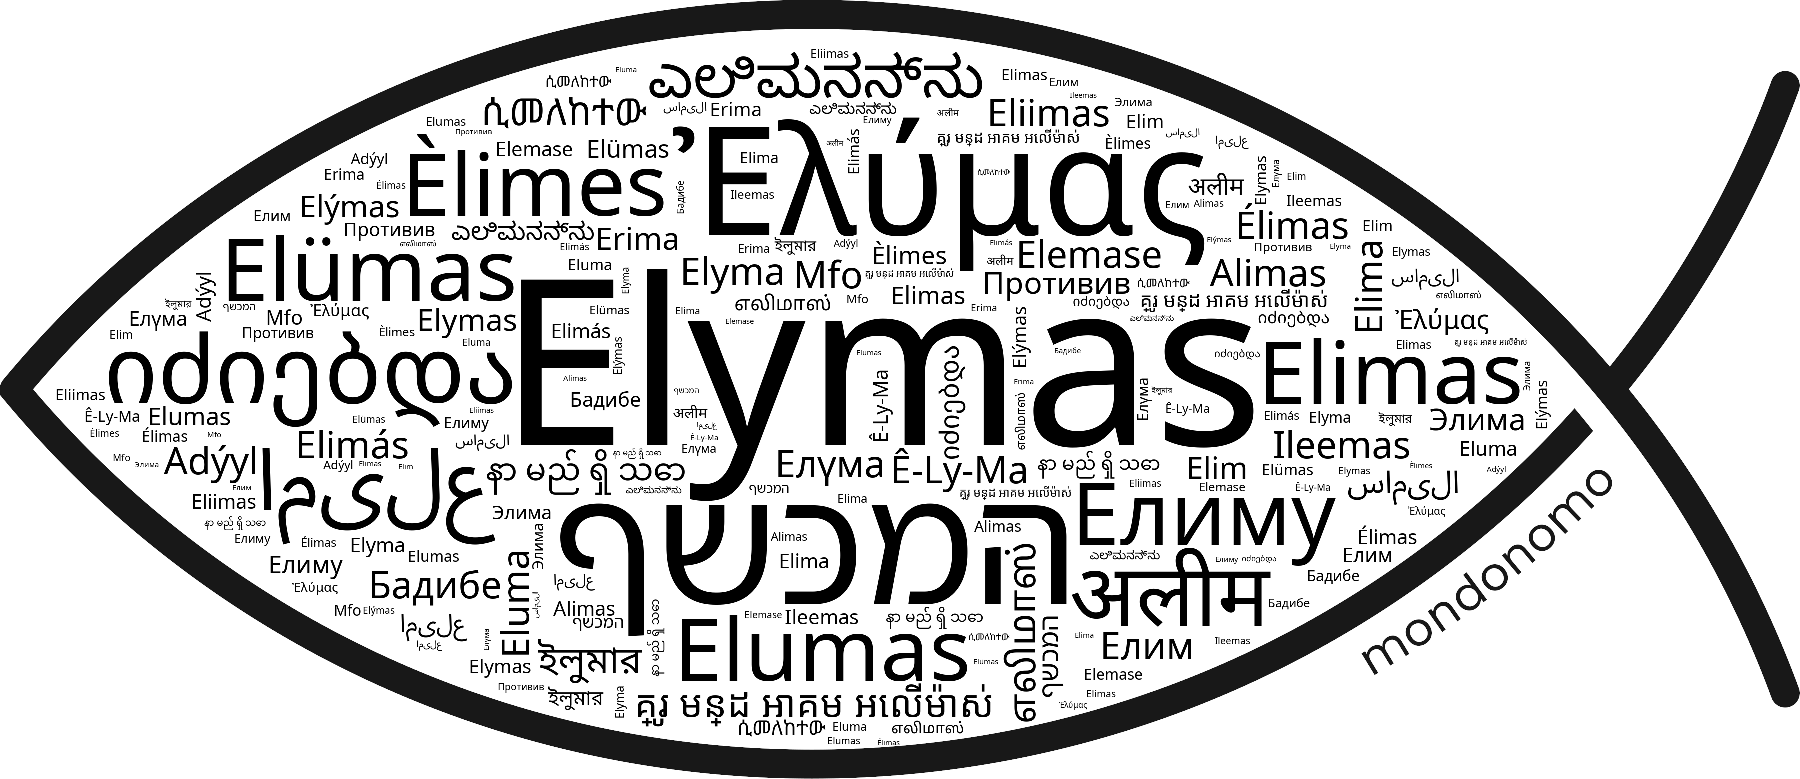 Name Elymas in the world's Bibles